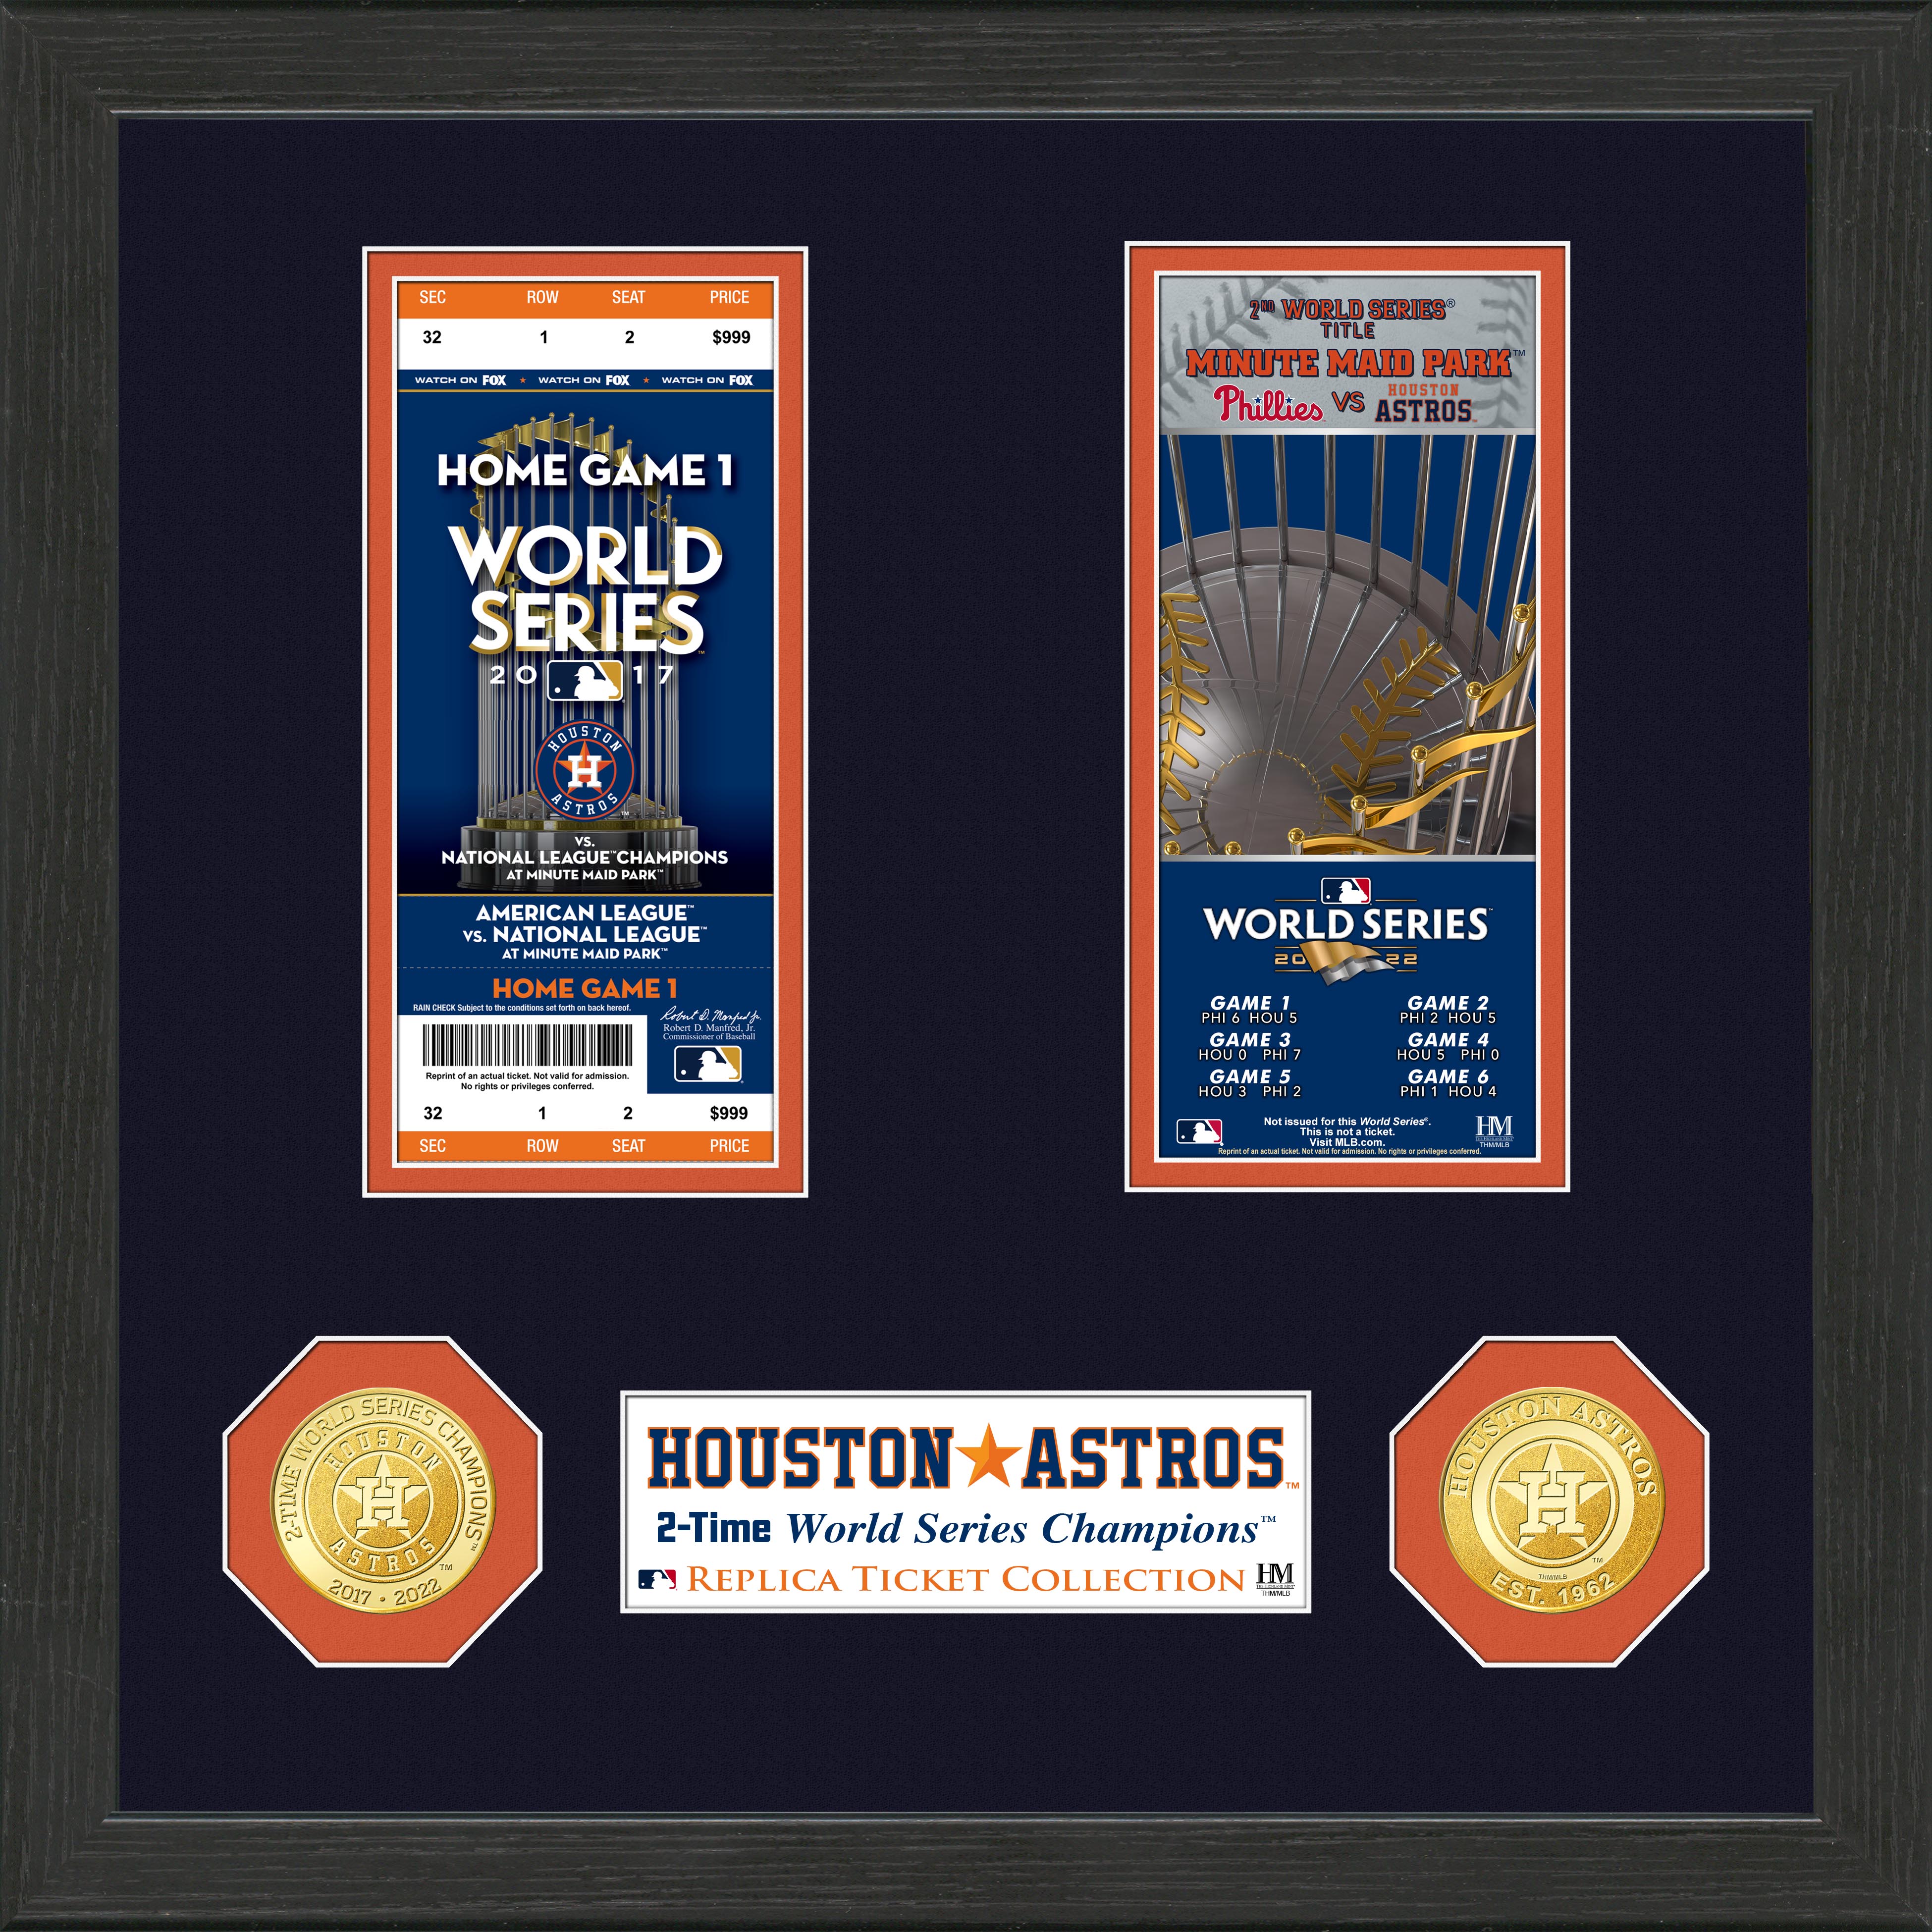 Houston Astros 2-Time World Series Champions Bronze Coin & Ticket Collection